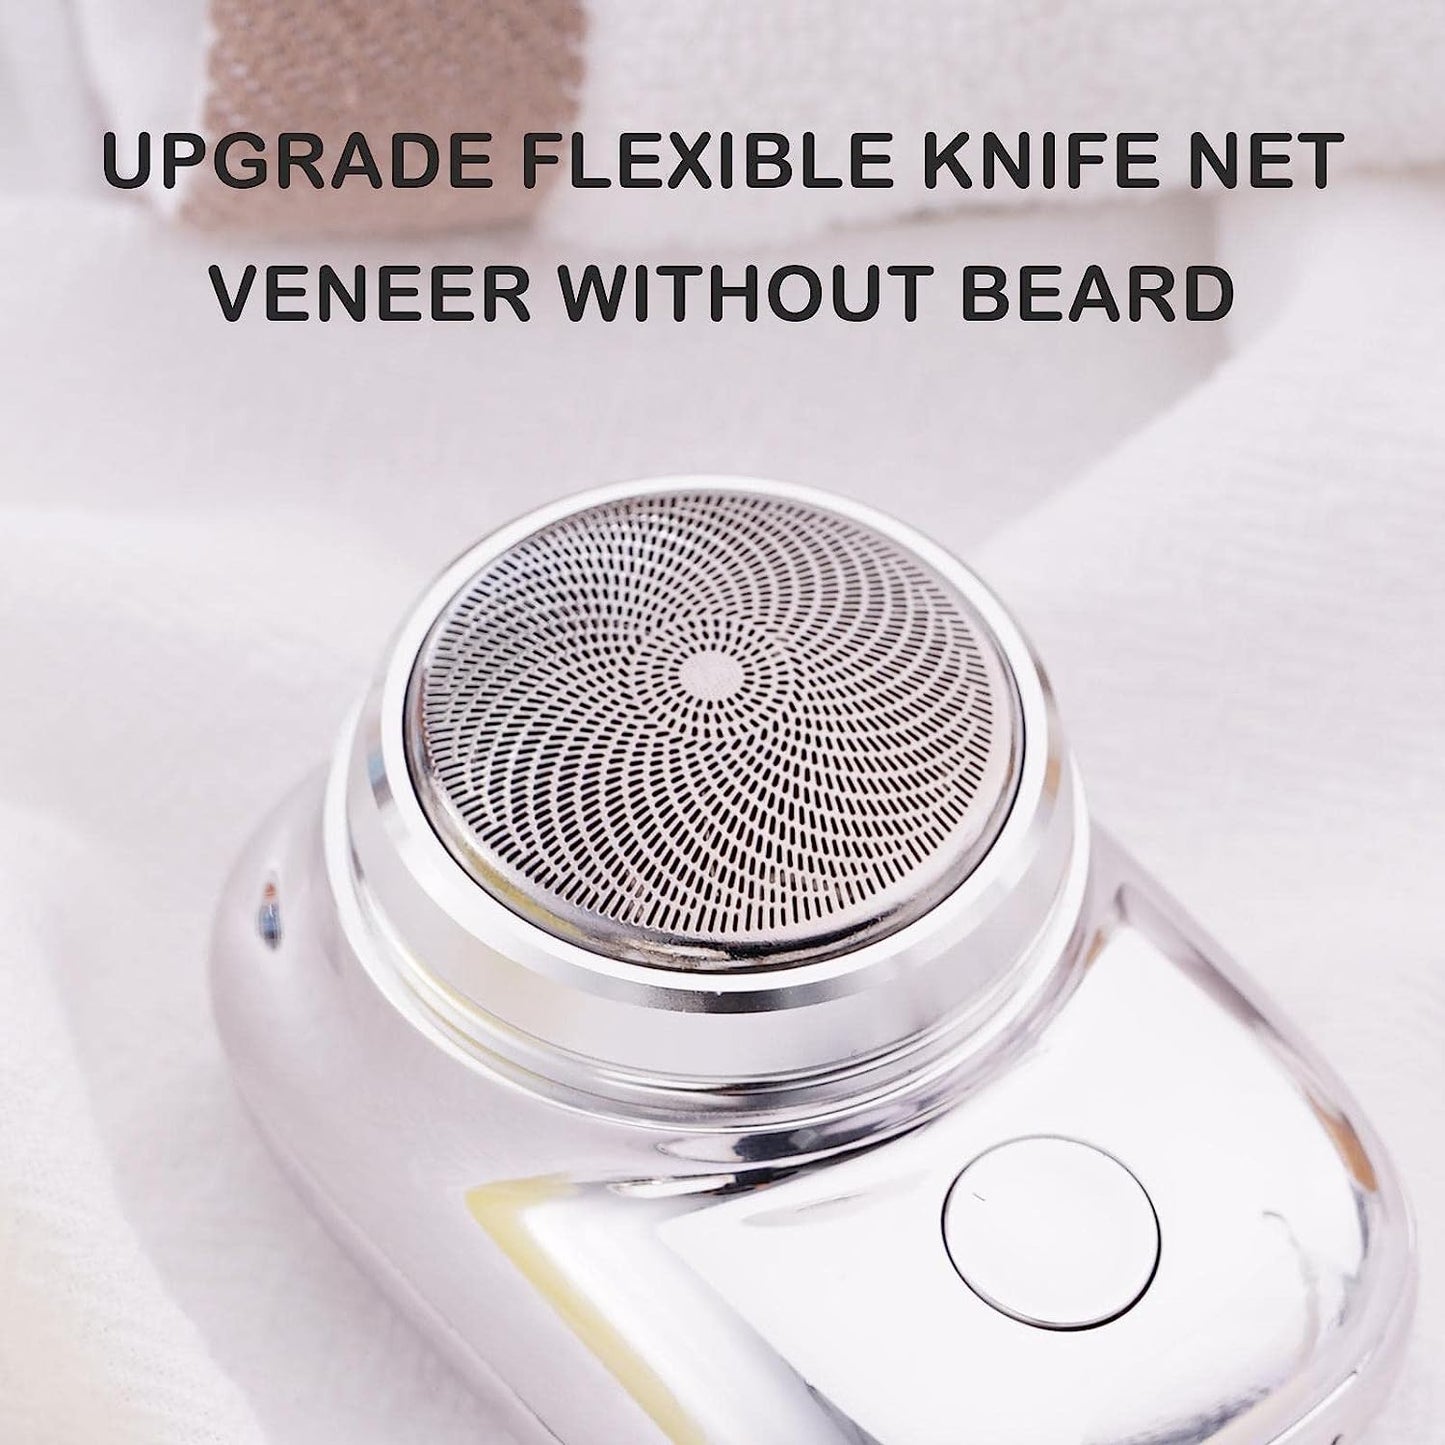 Mini Electric Shaver Portable | Pocket fashion | Rechargeable | Wireless Beard, Hair Razor for Men and Women | Home, Travel, Gift |